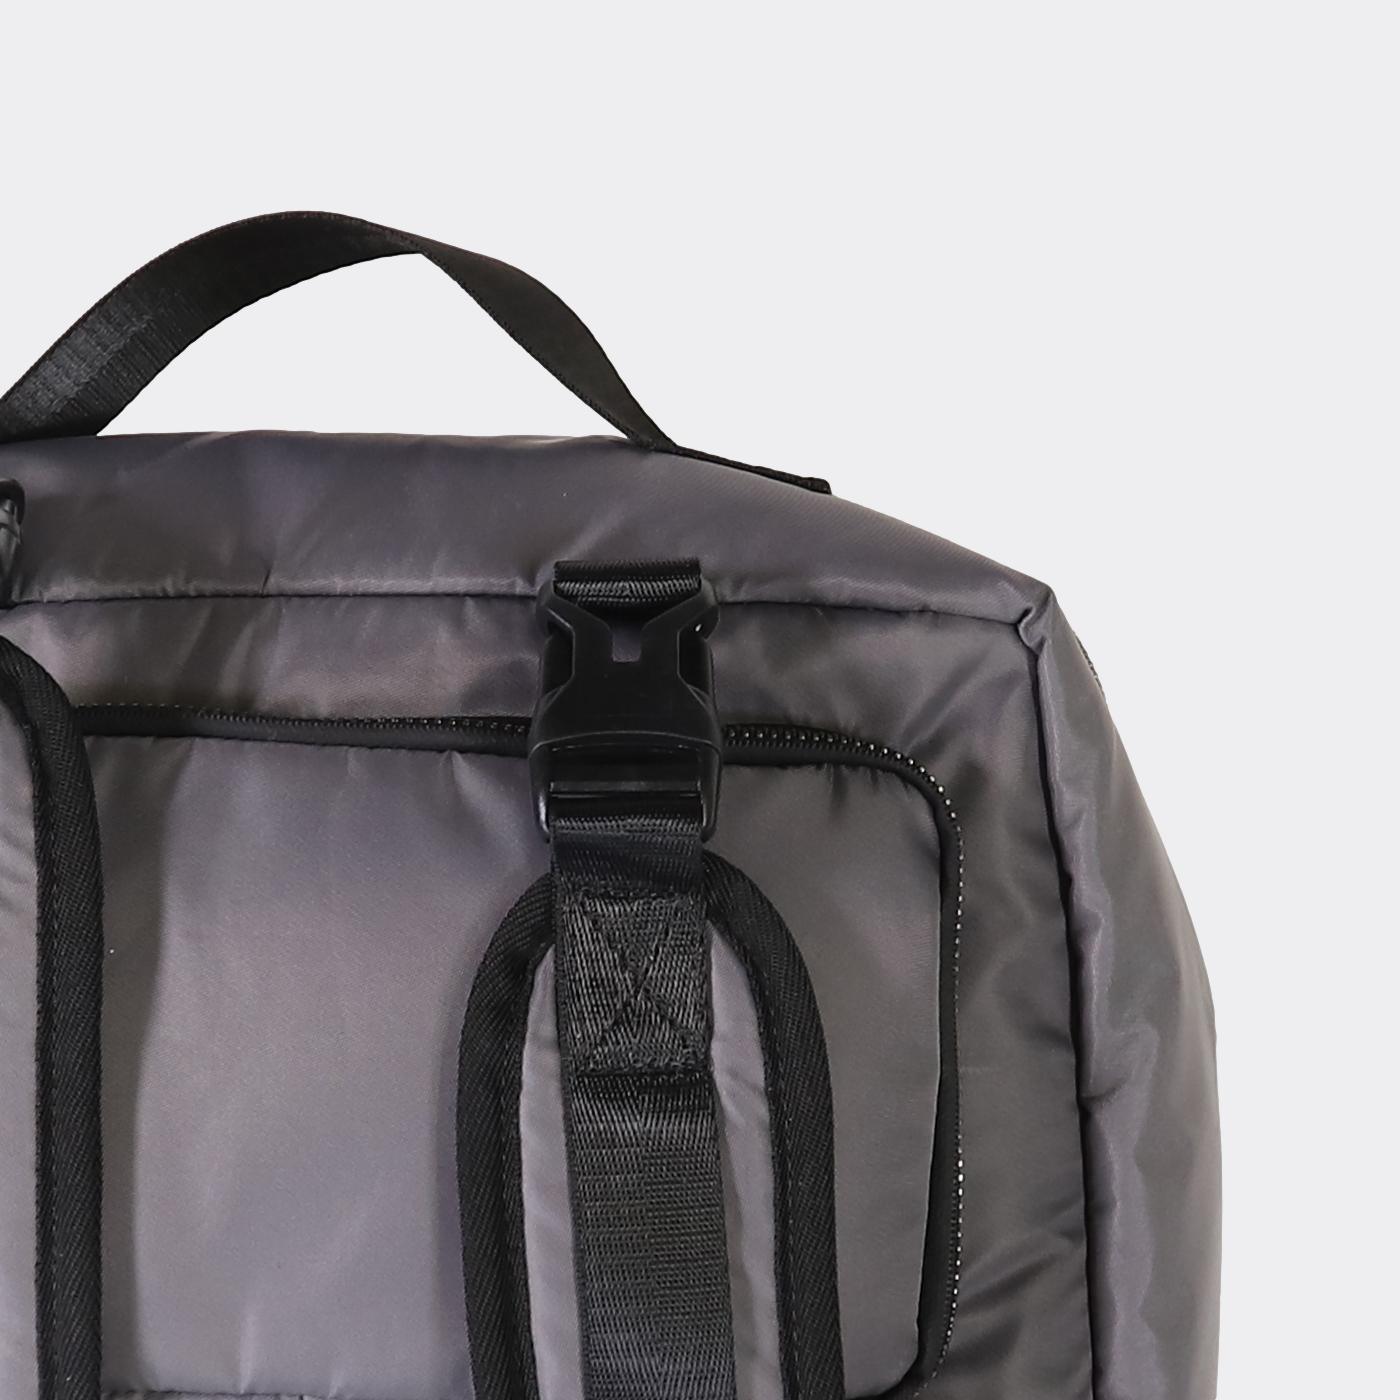 Maium Pannier Backpack - Known Source